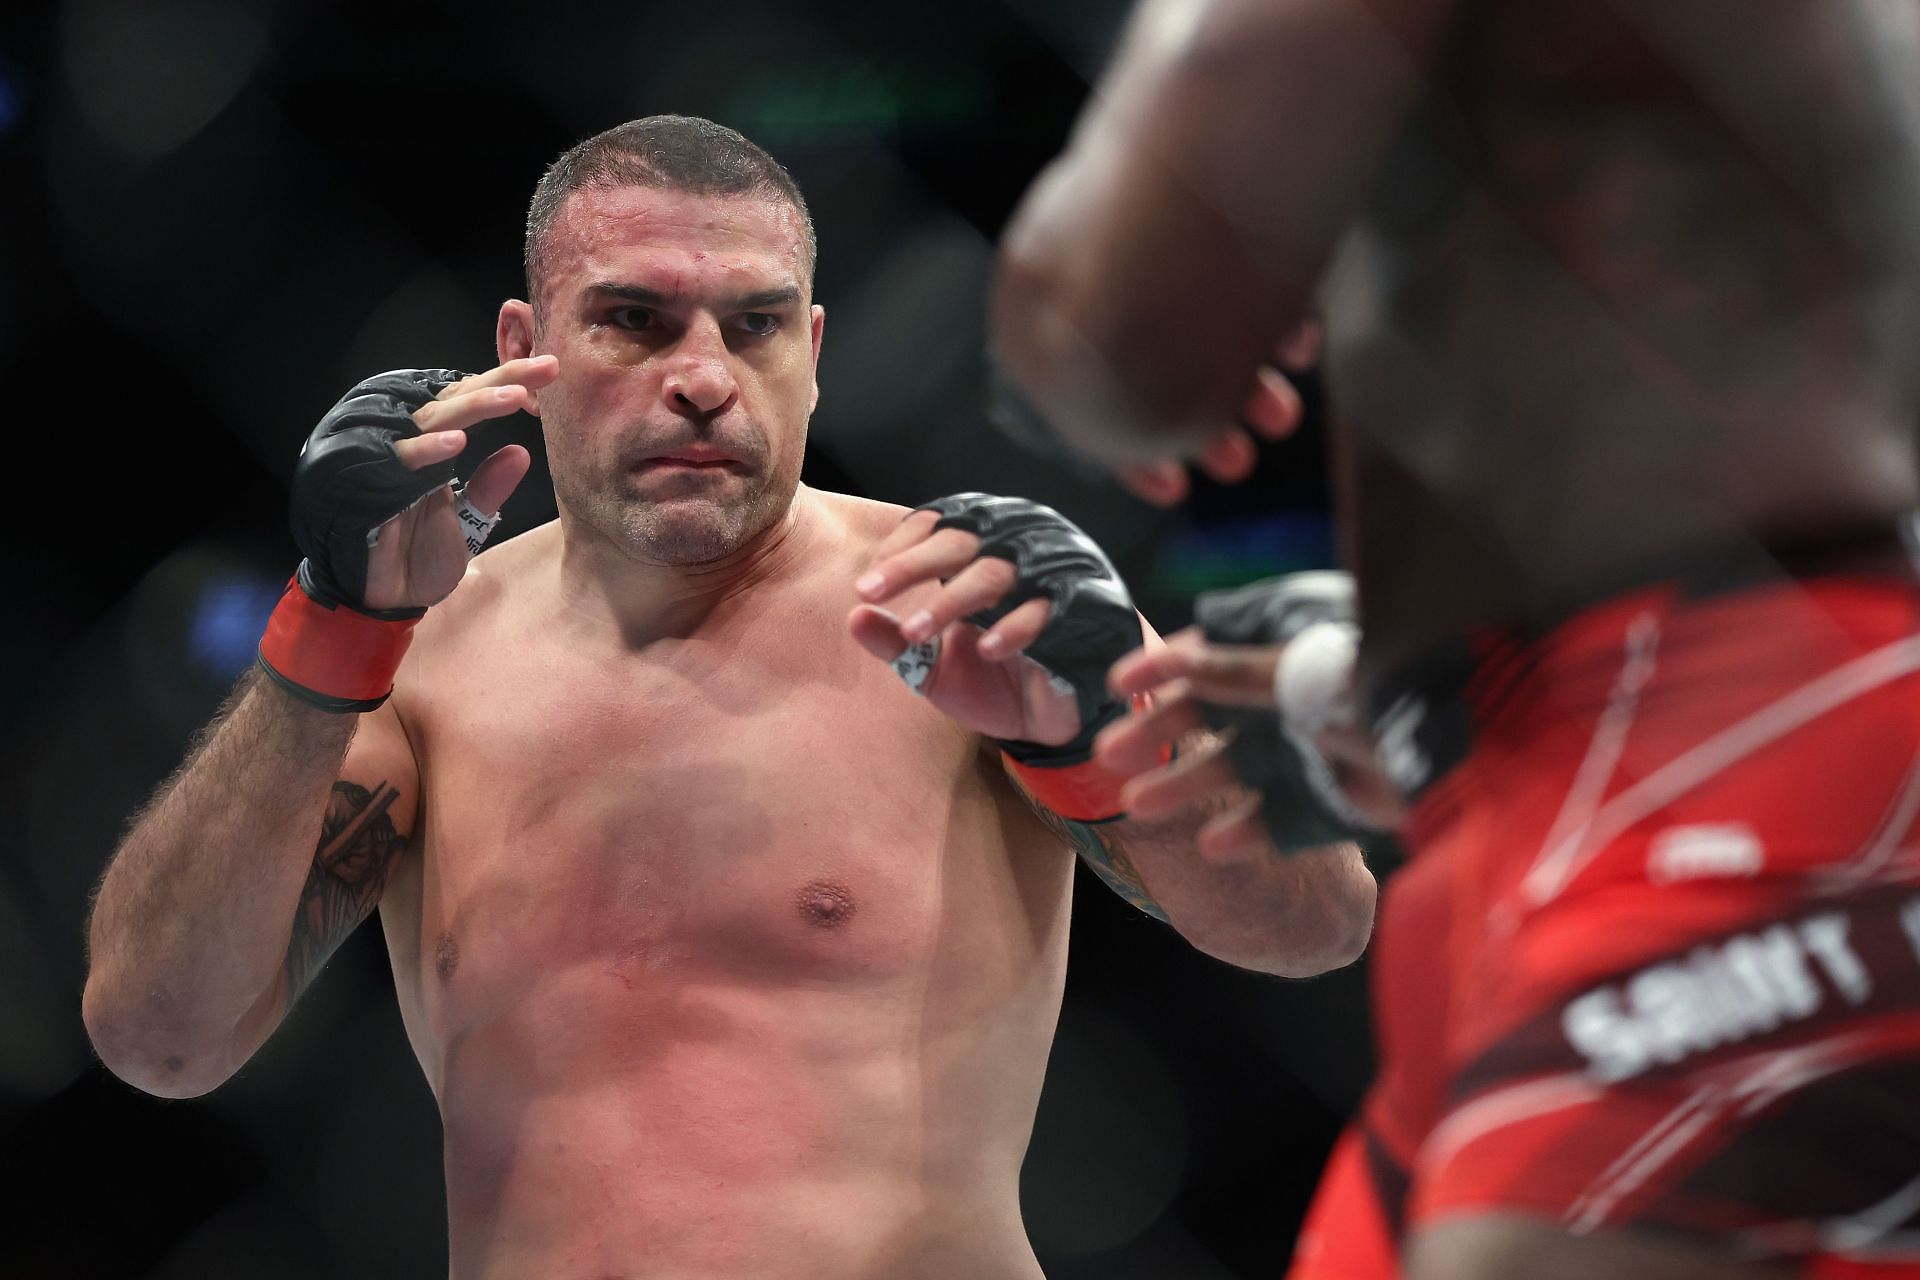 Shogun Rua appears to have his retirement fight planned for January